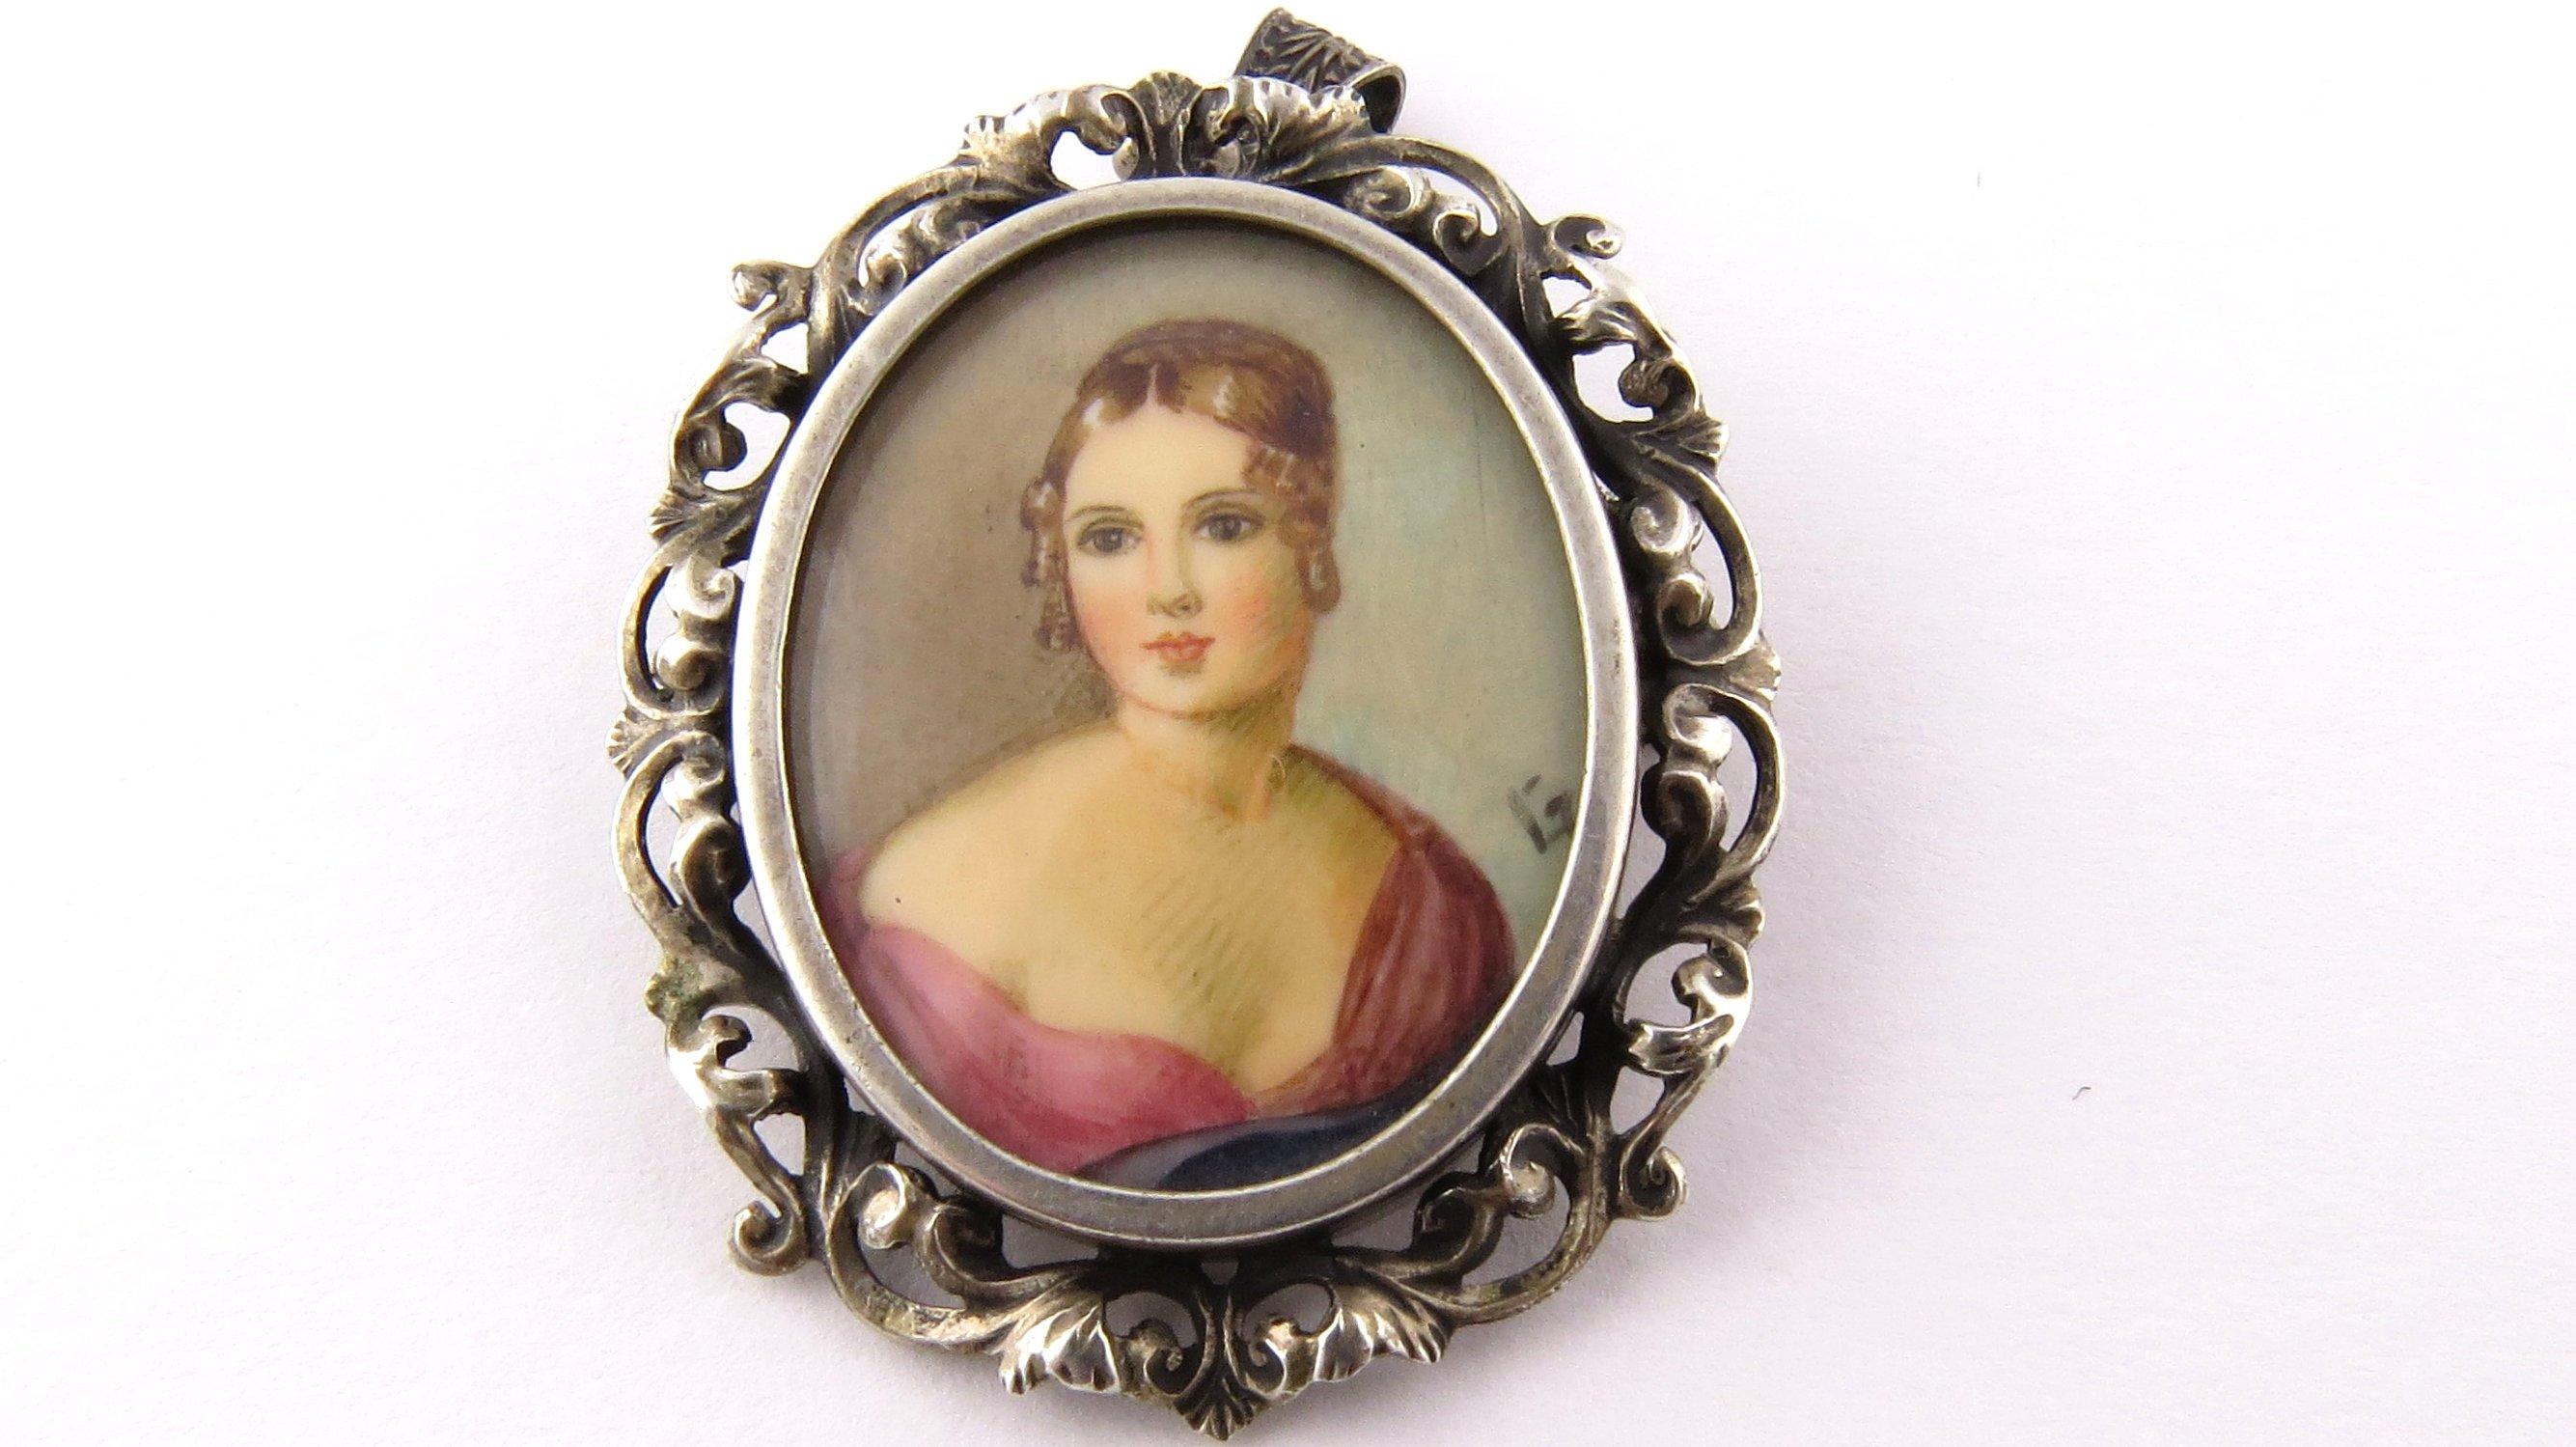 Vintage 800 Silver Hand Painted Portrait Brooch/Pendant- 
This lovely hand painted portrait features a lovely lady framed in ornate 800 silver and covered with glass. Can be worn as a brooch or a pendant. 
Size: 36 mm x 30 mm 
Weight: 4.4 dwt. / 6.9